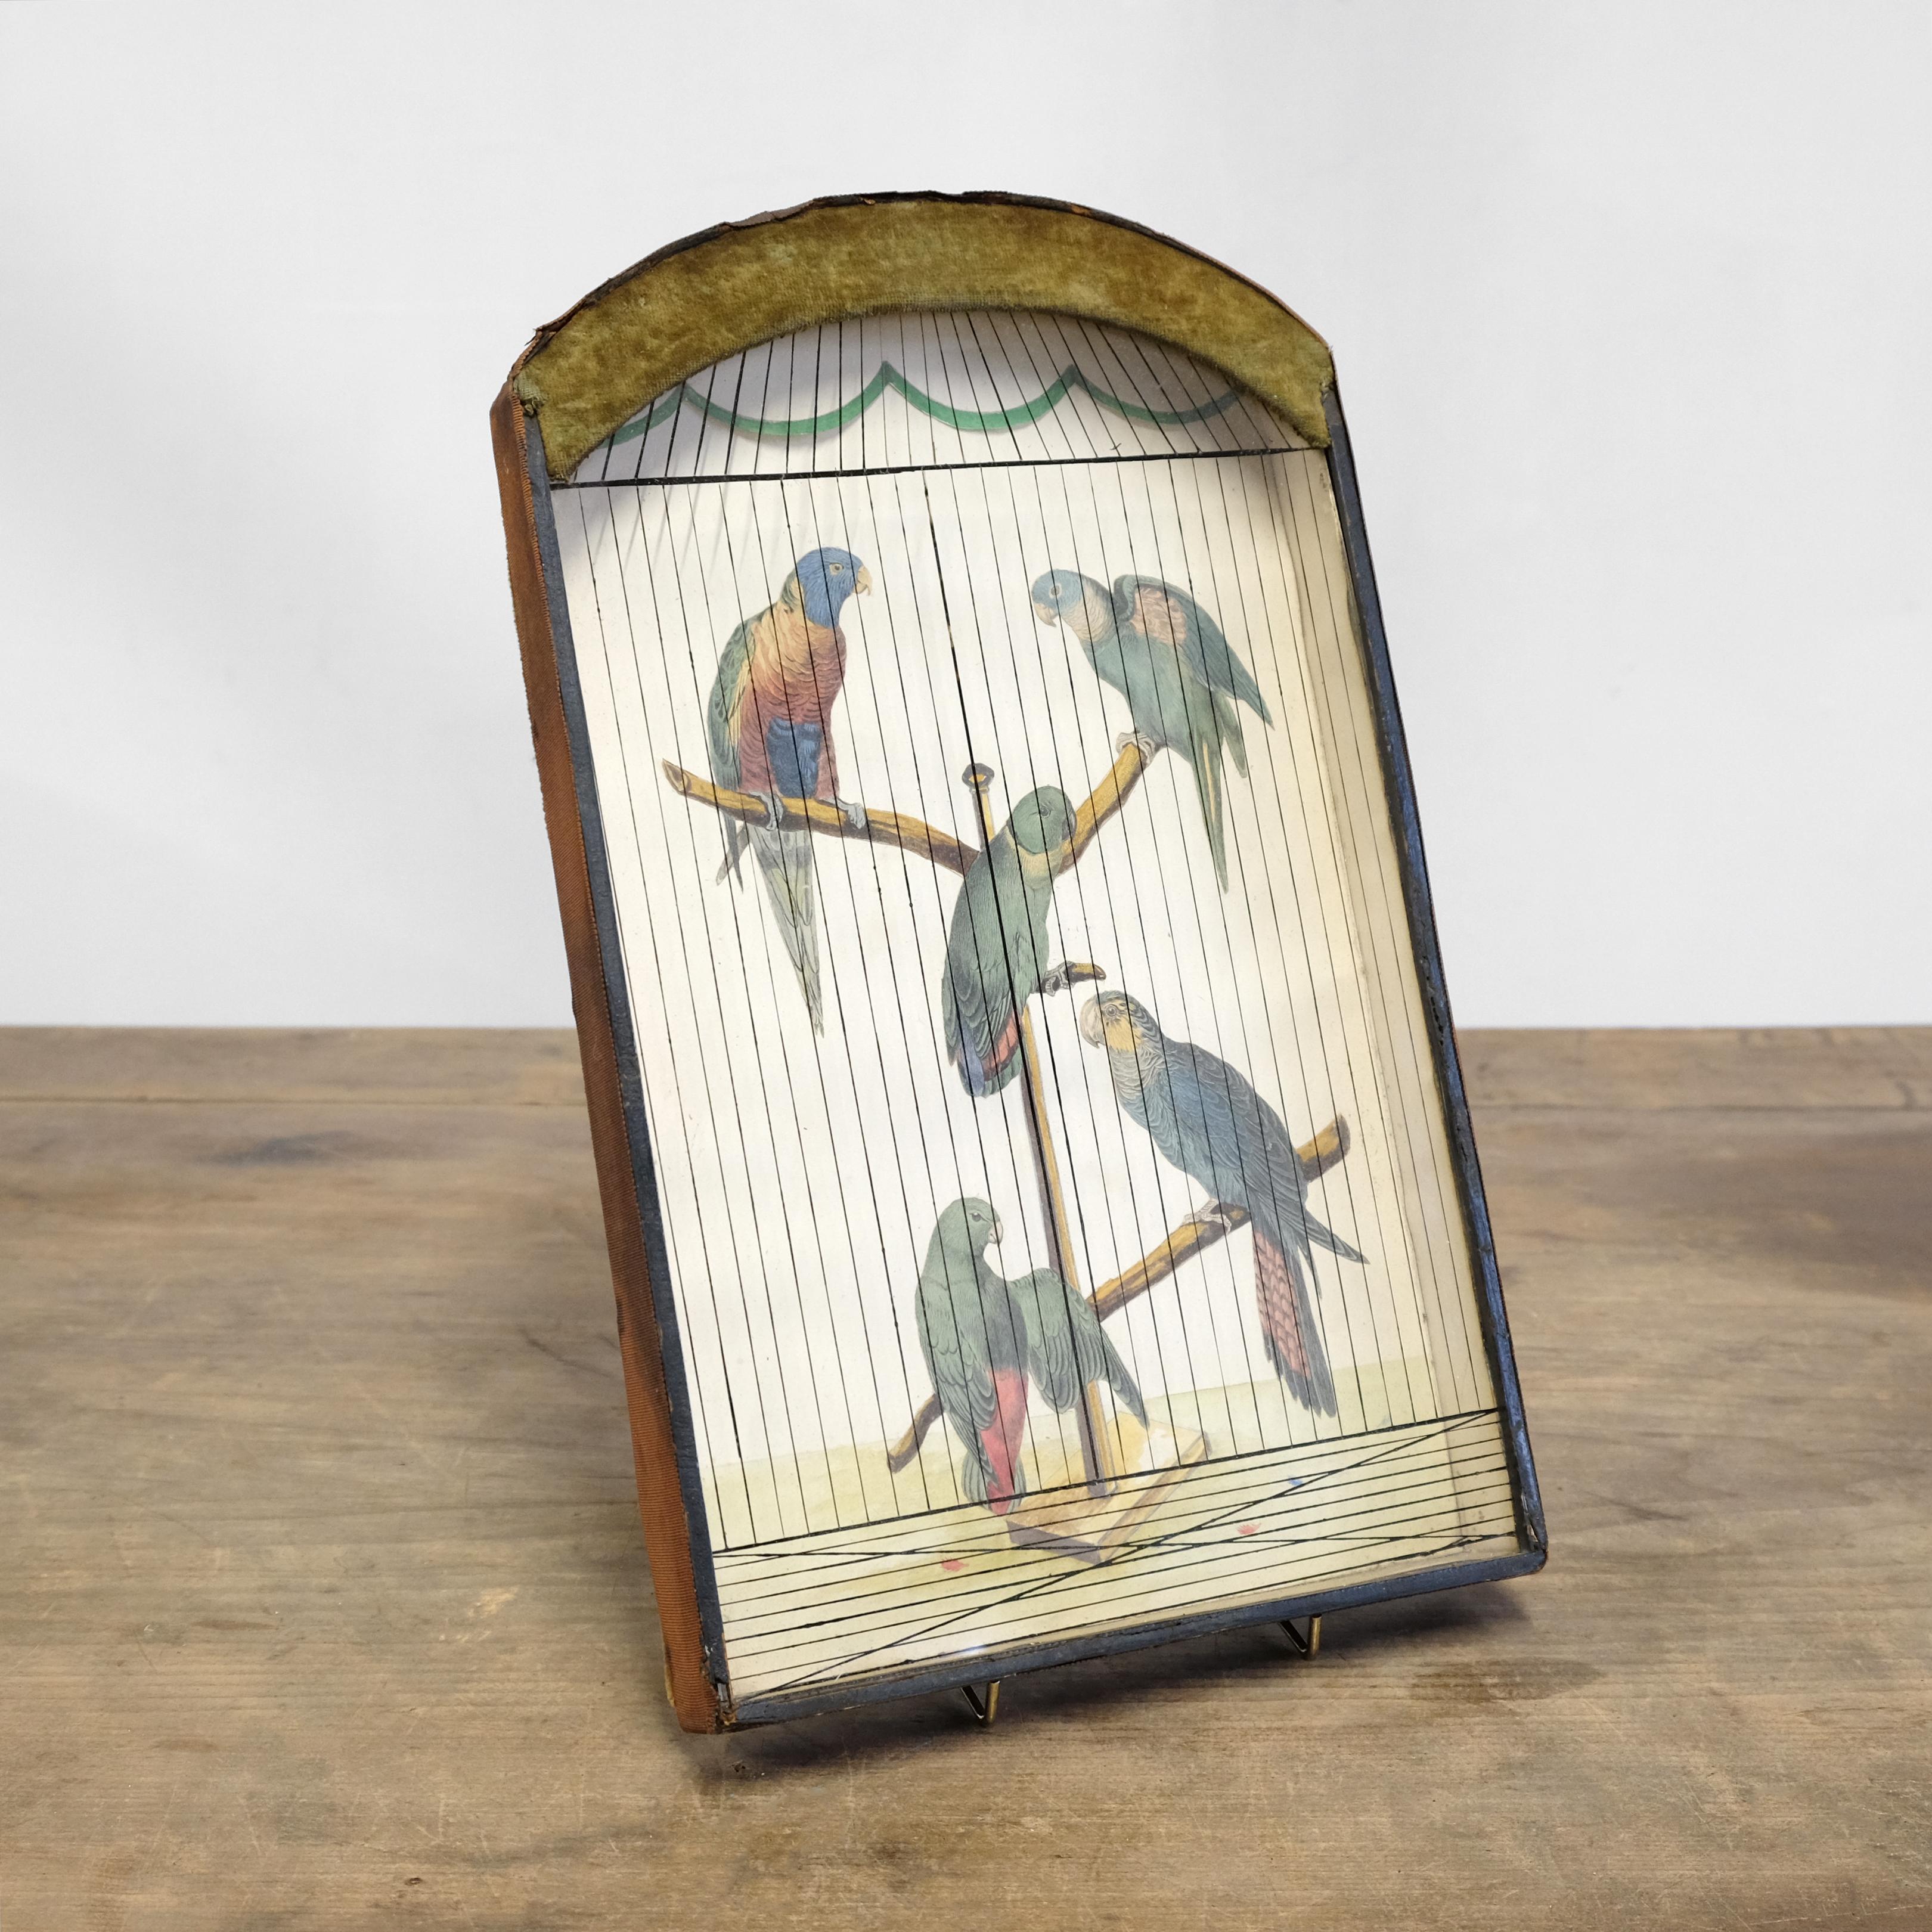 A mid 19th century trompe l’oeil parrot cage in completely original condition. The hand-coloured parrots on a naturalistic perch within a glass and penwork ‘cage’ with green swags above. The outer edge of the cage has its original fabric ribbon